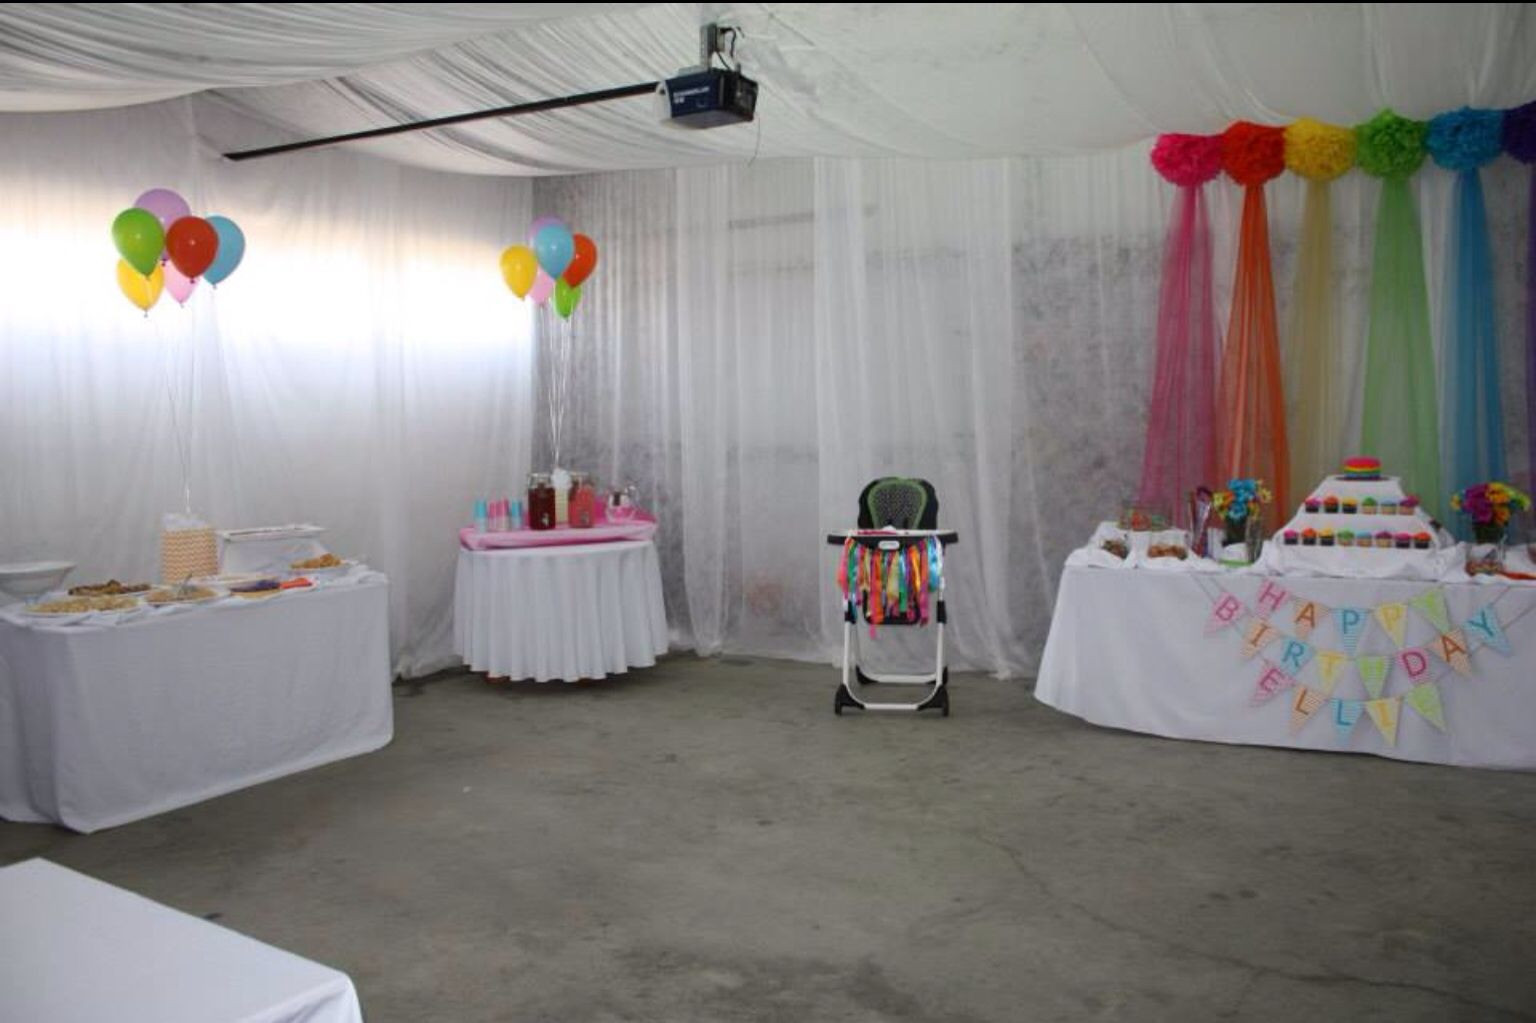 How To Decorate For A Birthday Party
 Rainbow party in garage